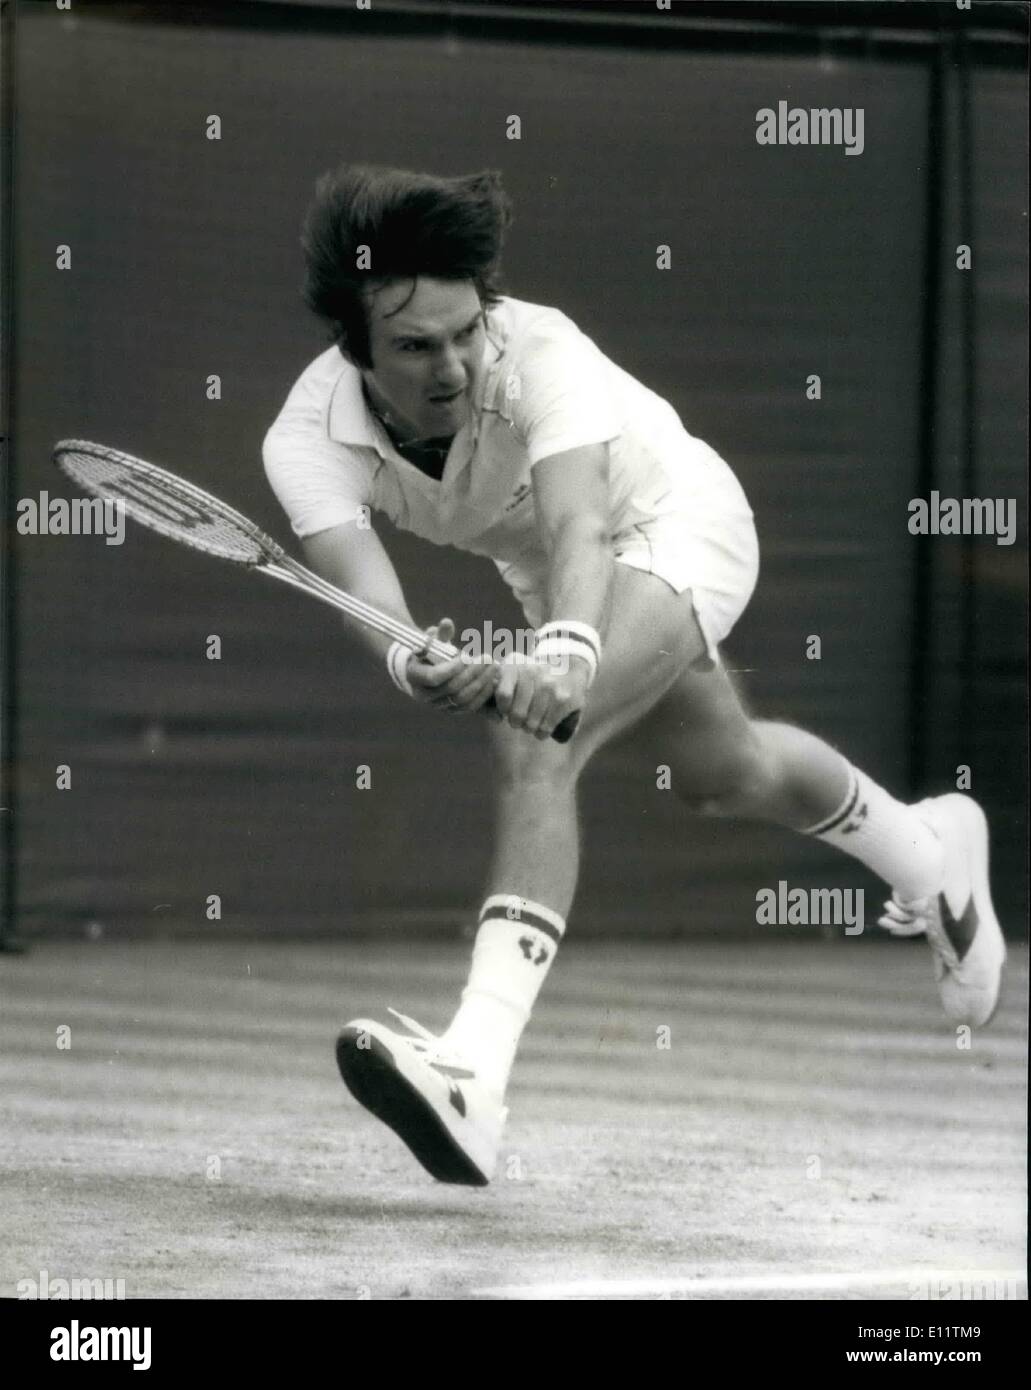 Jul. 07, 1980 - McEnroe Beats conners to reach the final : In the Men's Semi-final on the center court at Wimbledon today john McEnroe beat his fellow American Jimmy Conners in four sets to reach the final in which he plays Bjorn Borg. Photo shows Jimmy conners seen in action during his match against McEnroe. Stock Photo